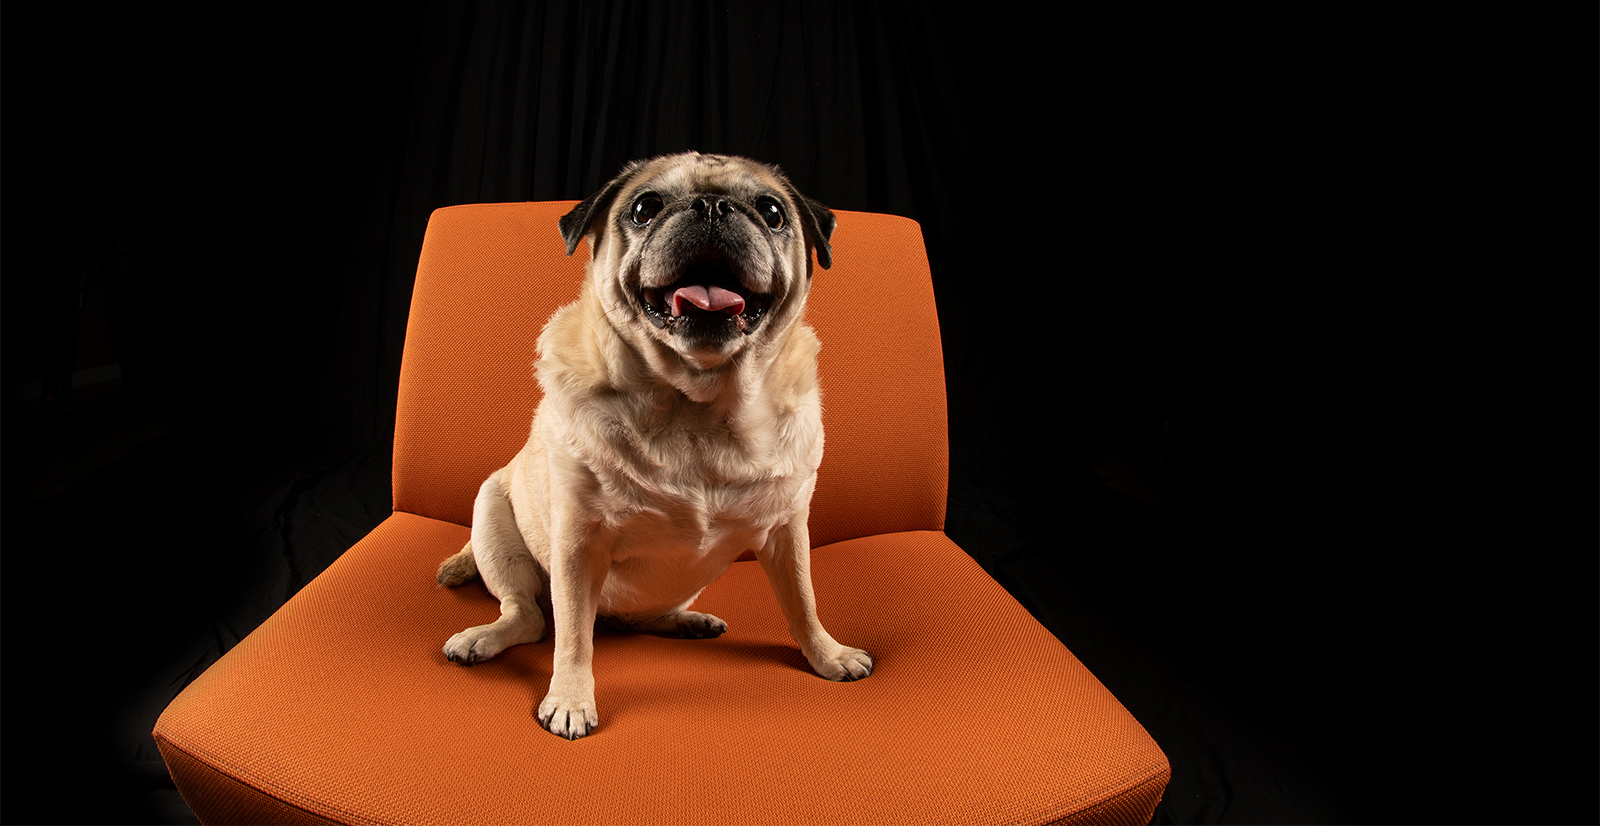 Pug sitting on a chair in a studio.